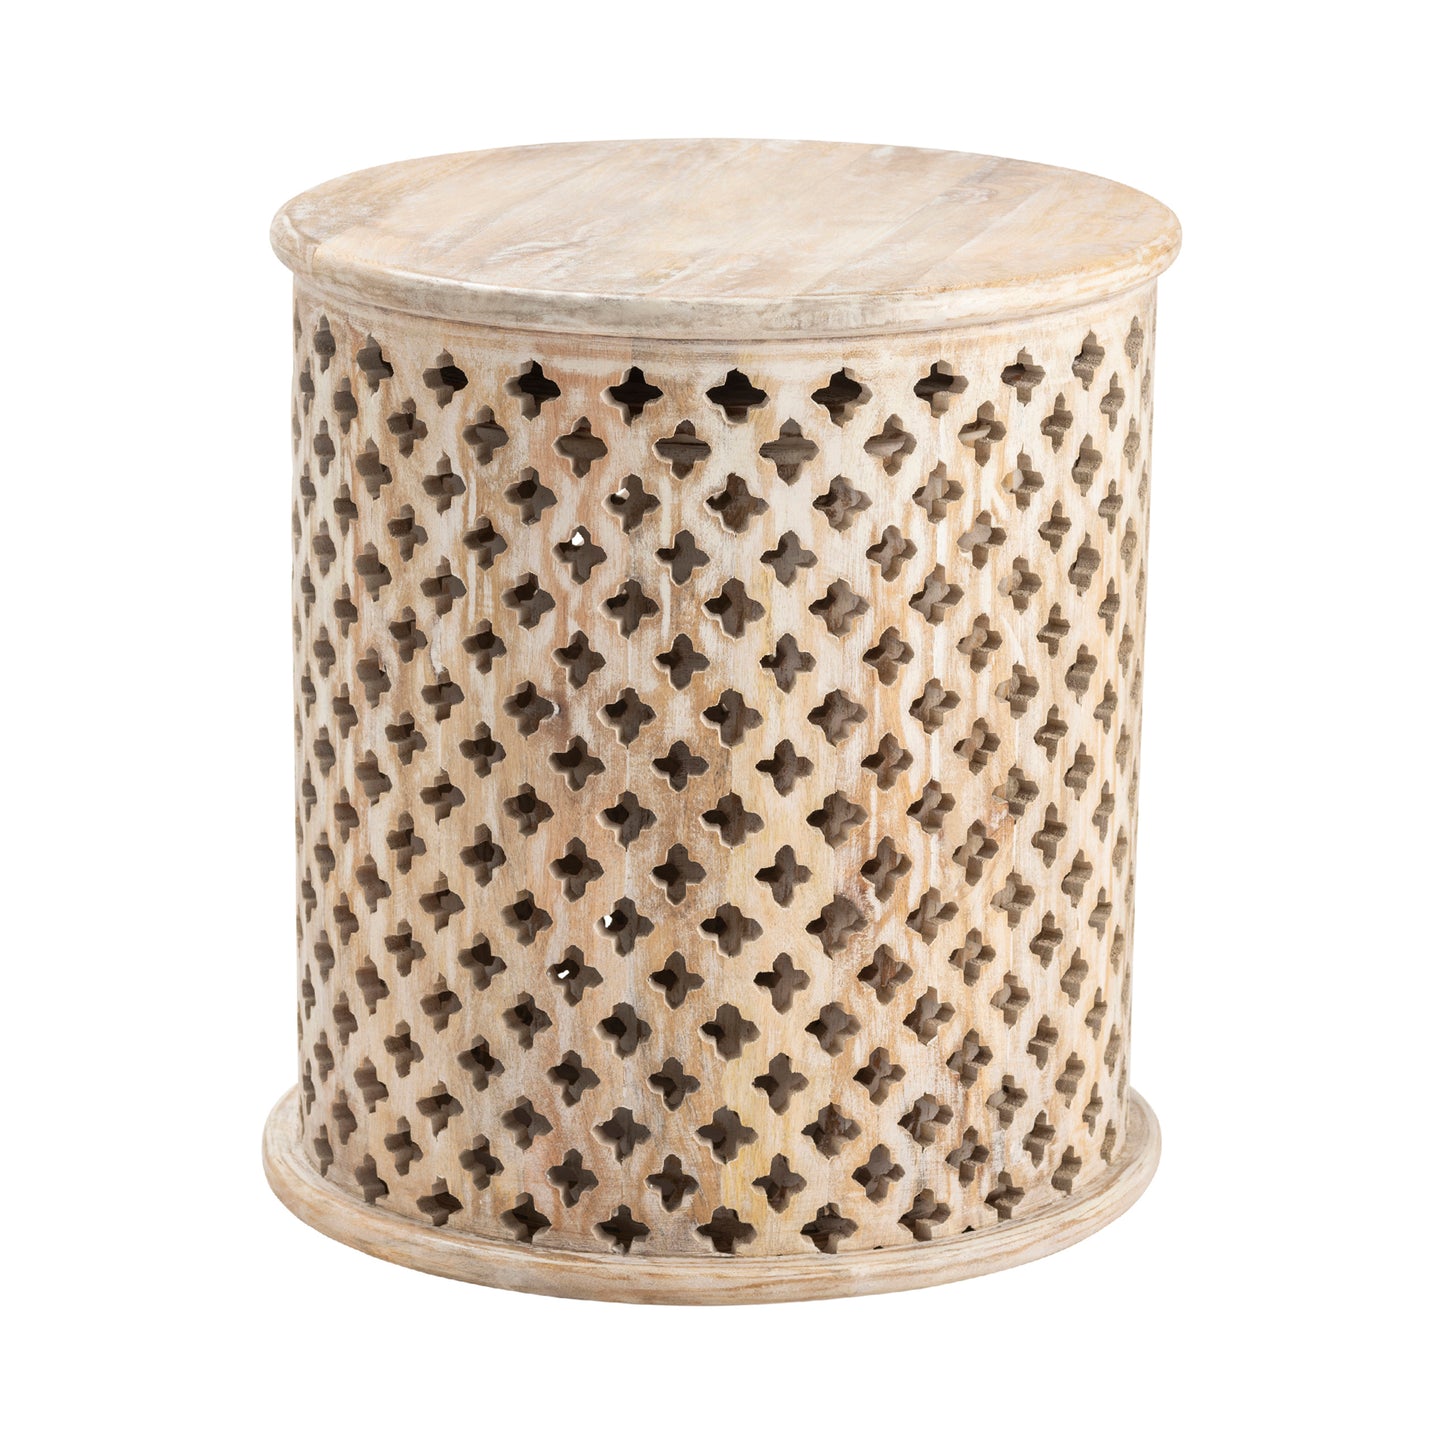 Midland accent table